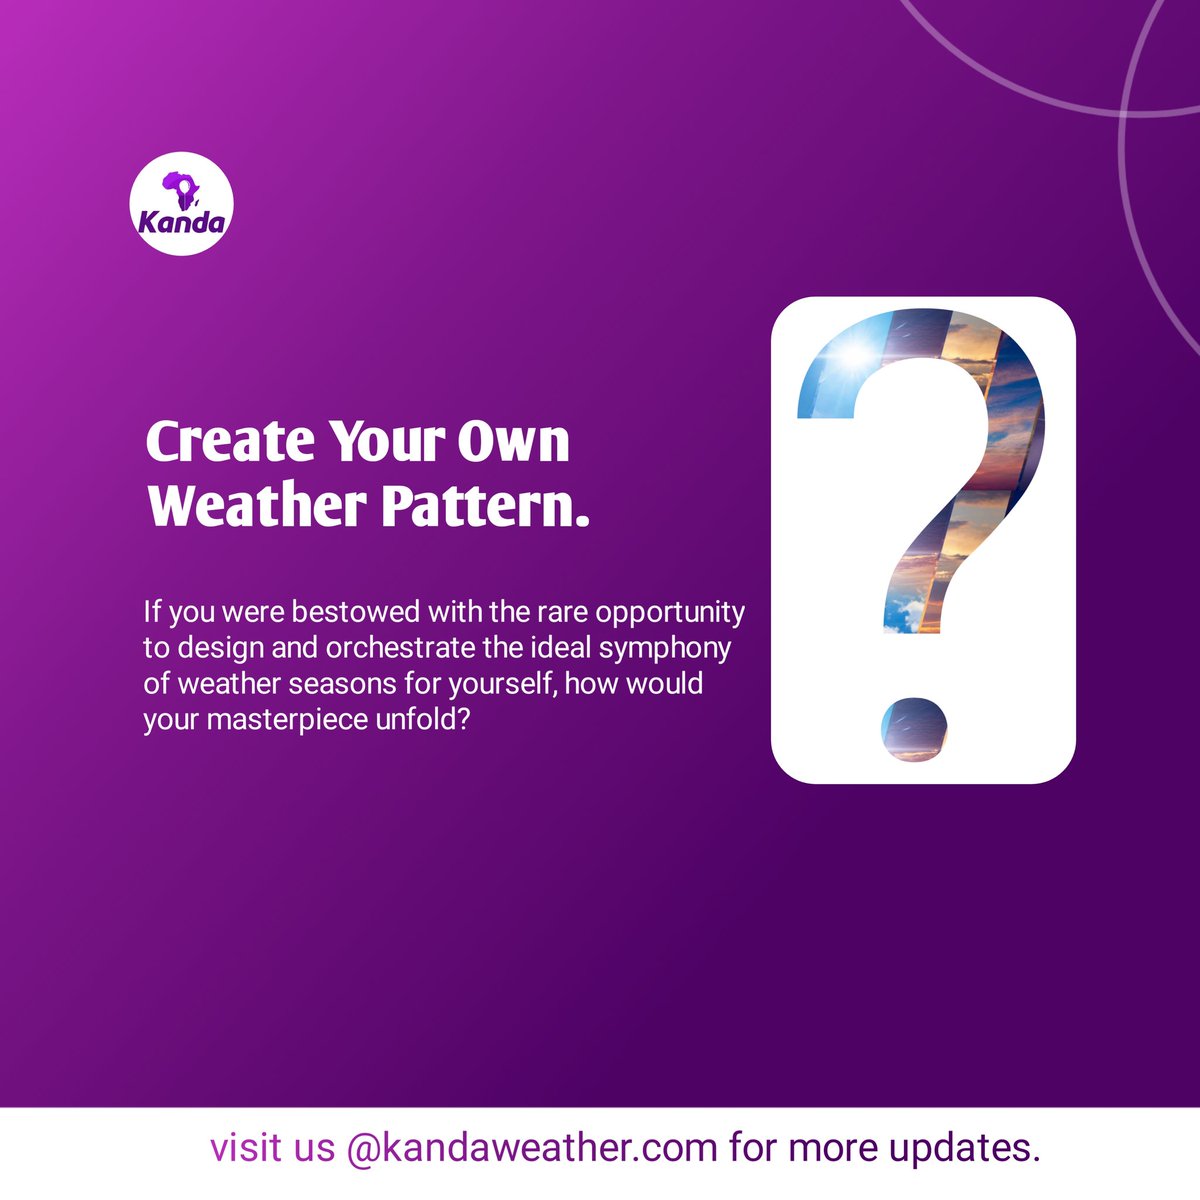 CREATE YOUR OWN WEATHER SEASON.🌦️🌦️ If you were bestowed with the rare opportunity to design and orchestrate the ideal symphony of weather seasons for yourself, how would your masterpiece unfold? #DreamWeather #KandaWeather